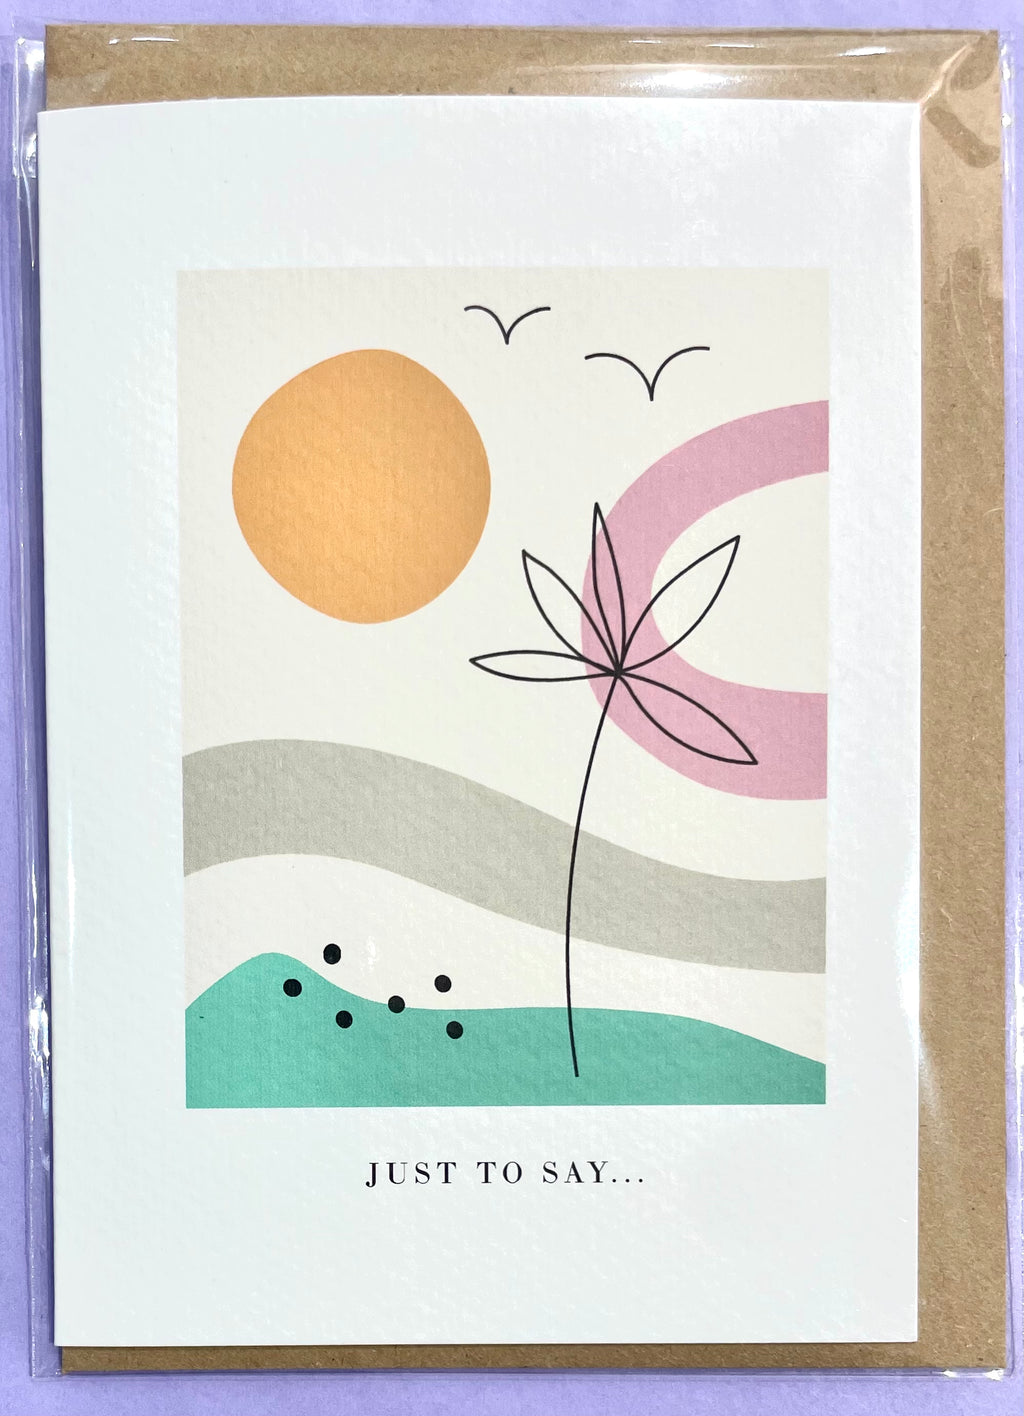 Studio Lowen 'Just To Say' Card